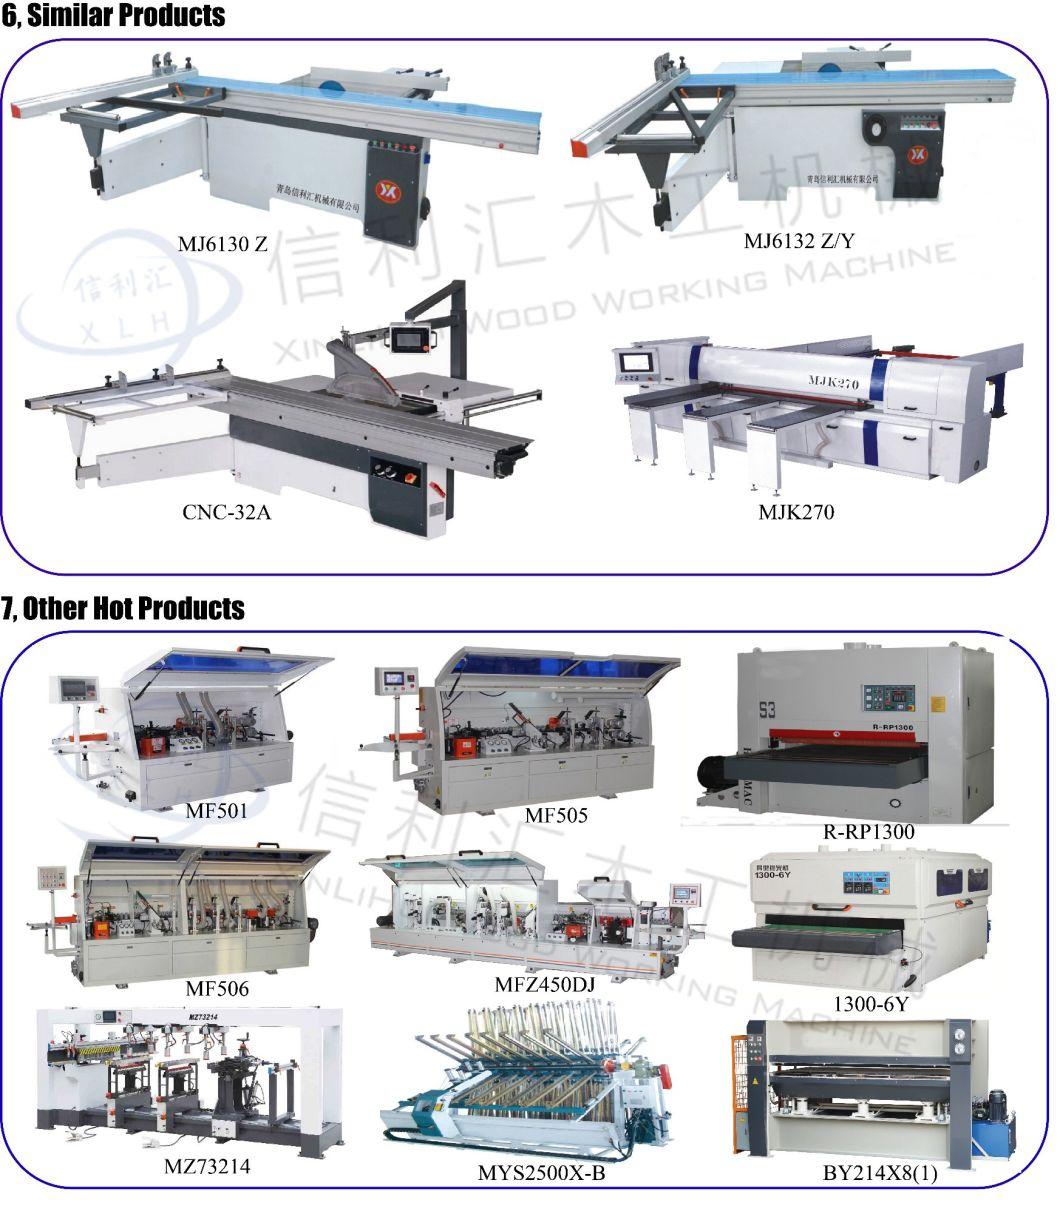 Excellent Cutting Machine Automatic Post Forming Machine/ Postformer Fire Board / Fire-Proof Plate Warping Machine/ Forming Machine Fire Board Packing Machine